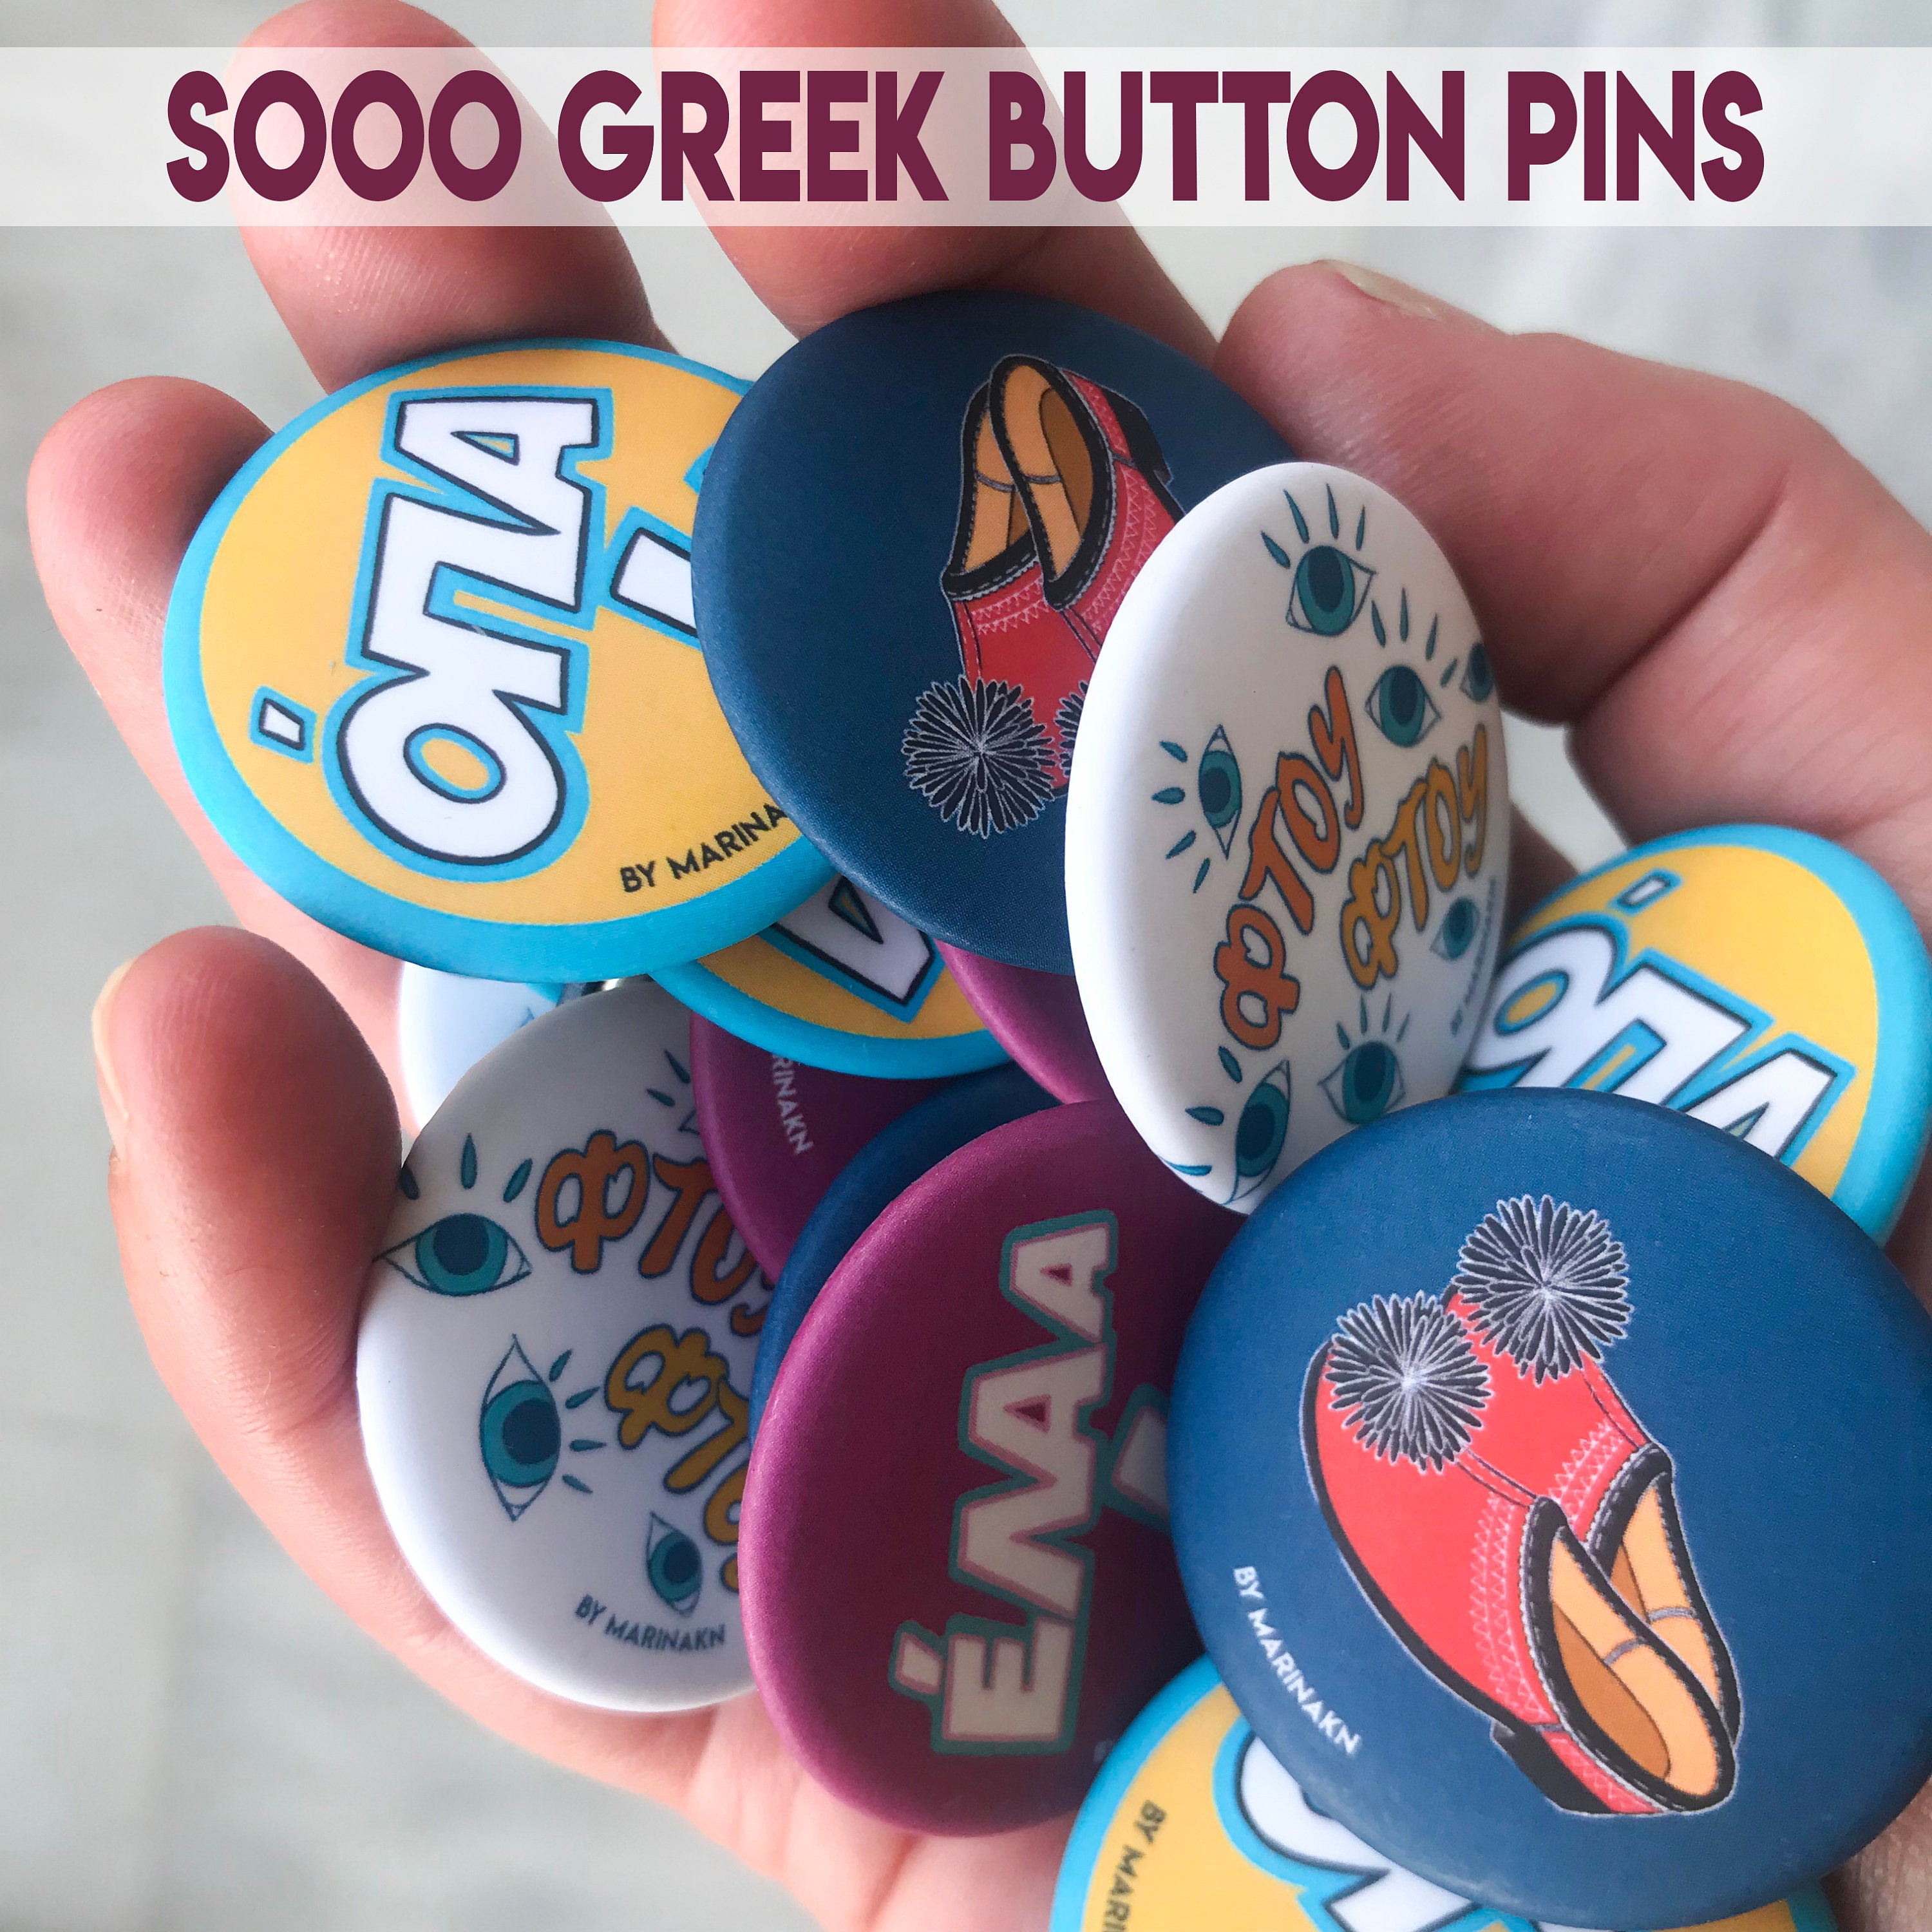 Button Pins Badge, Pinback, Handmade in Greece, Evil Eye, Greek Expression and Words, Greek Design Illustration, Tradition and Retro Style